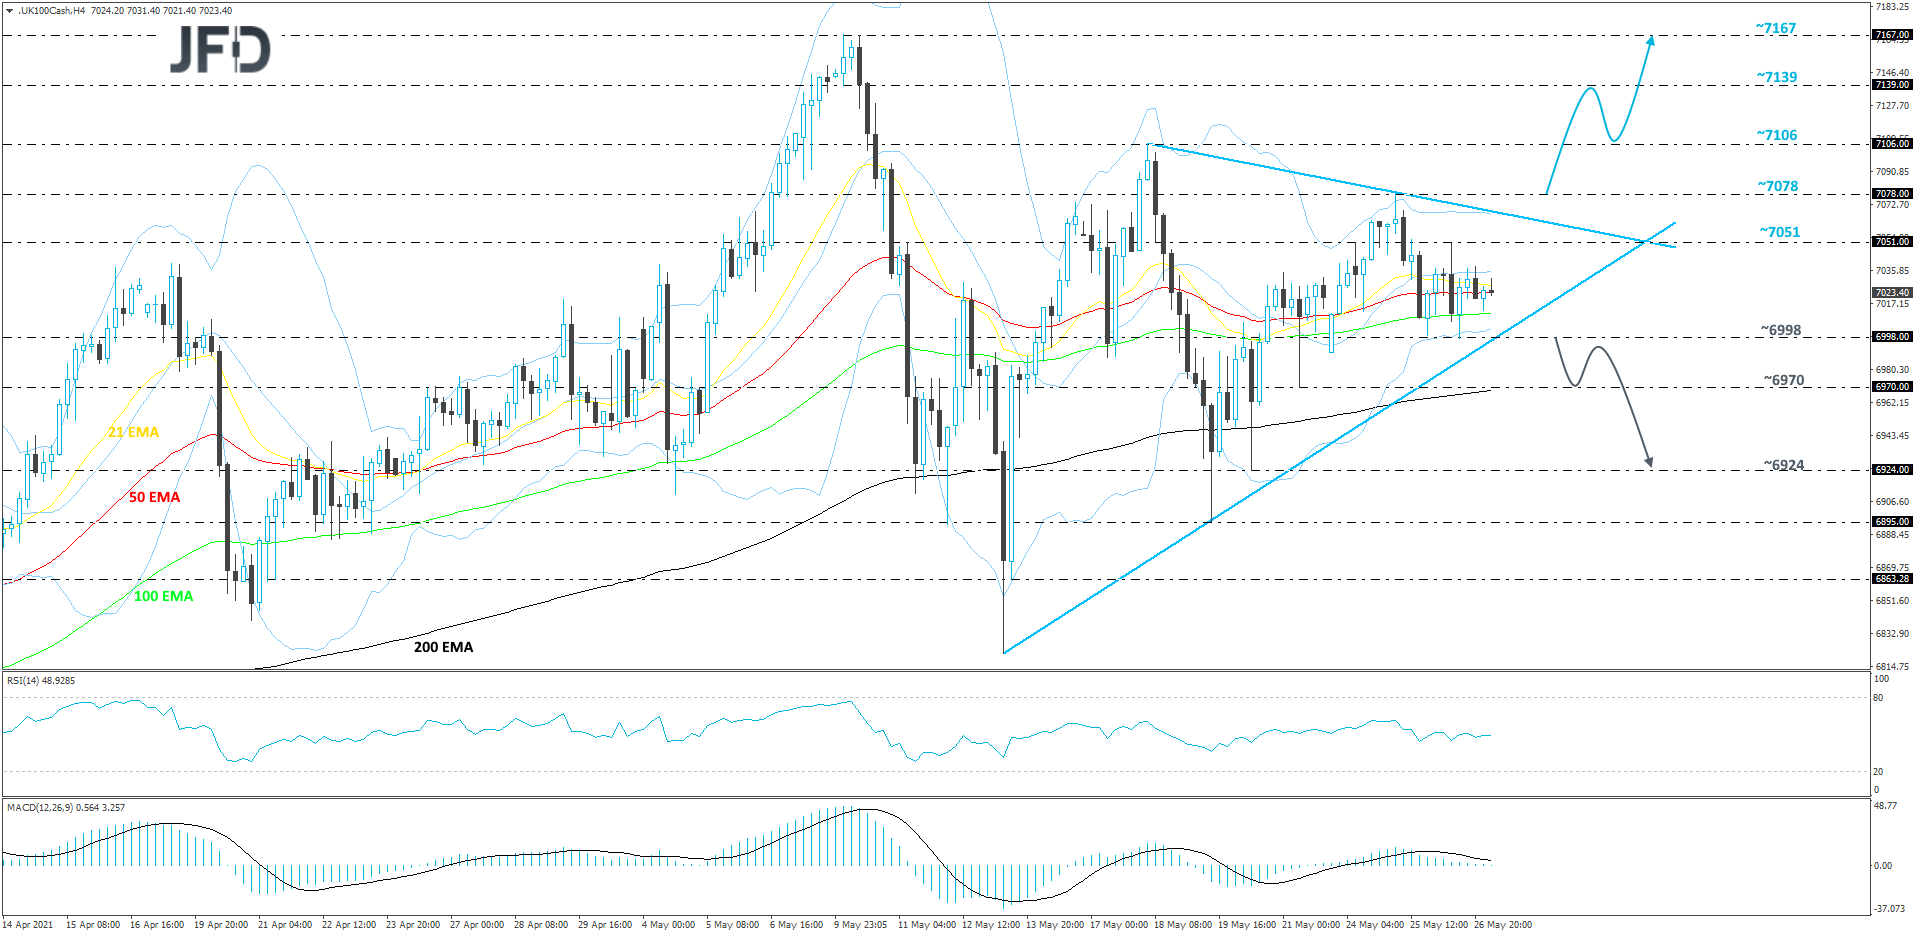 FTSE 100 cash index 4-hour chart technical analysis